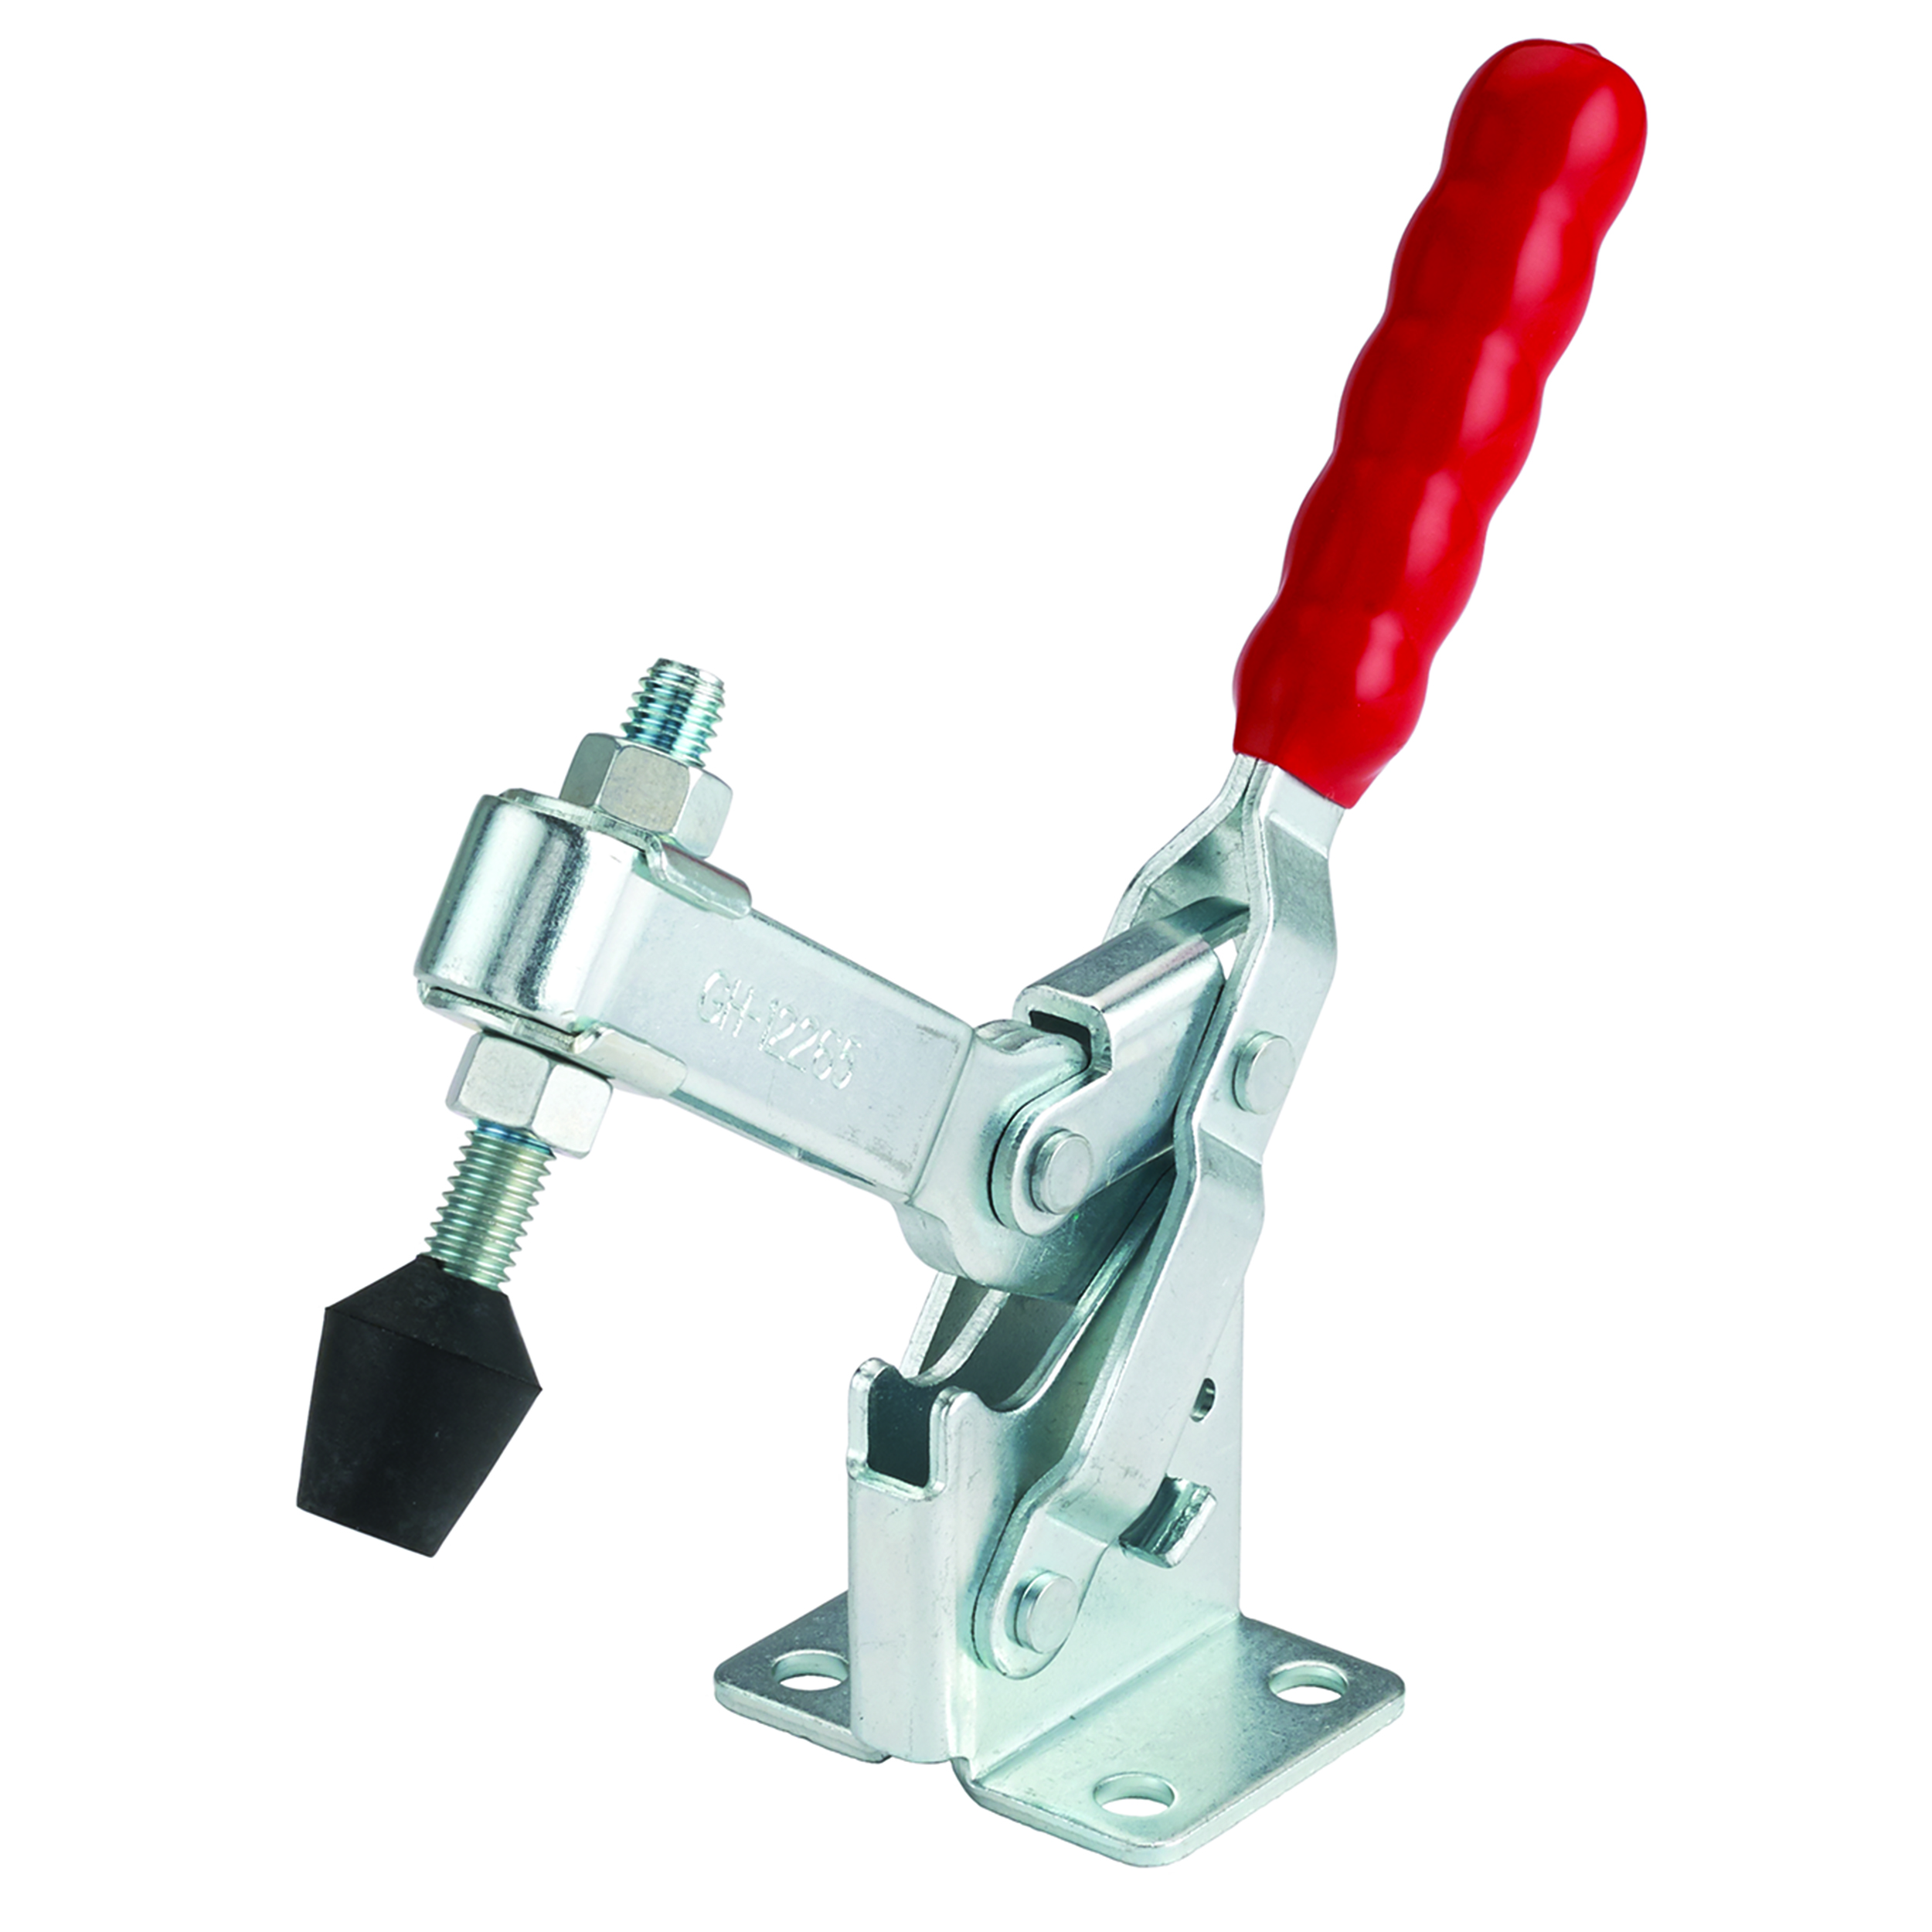 Vertical Handle Toggle Clamp, 5-3/4" X 7-1/2", 750 Lb. Capacity